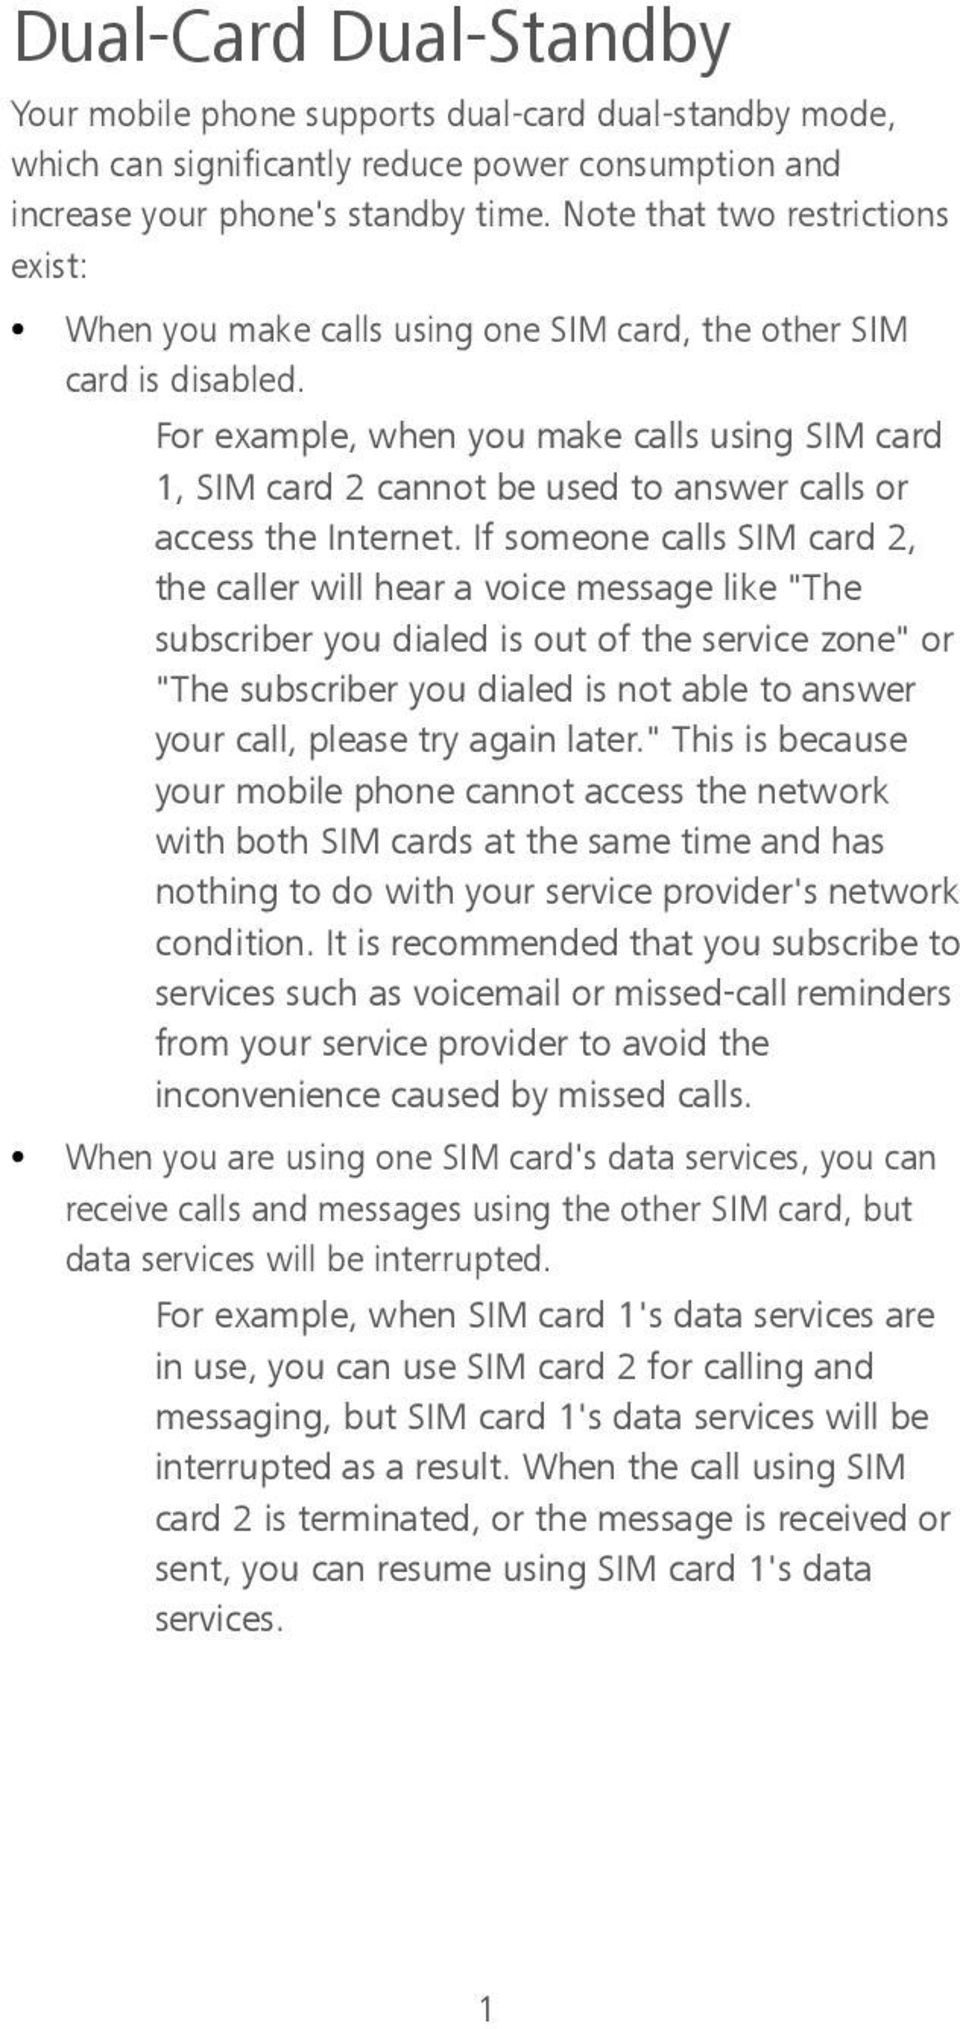 For example, when you make calls using SIM card 1, SIM card 2 cannot be used to answer calls or access the Internet.